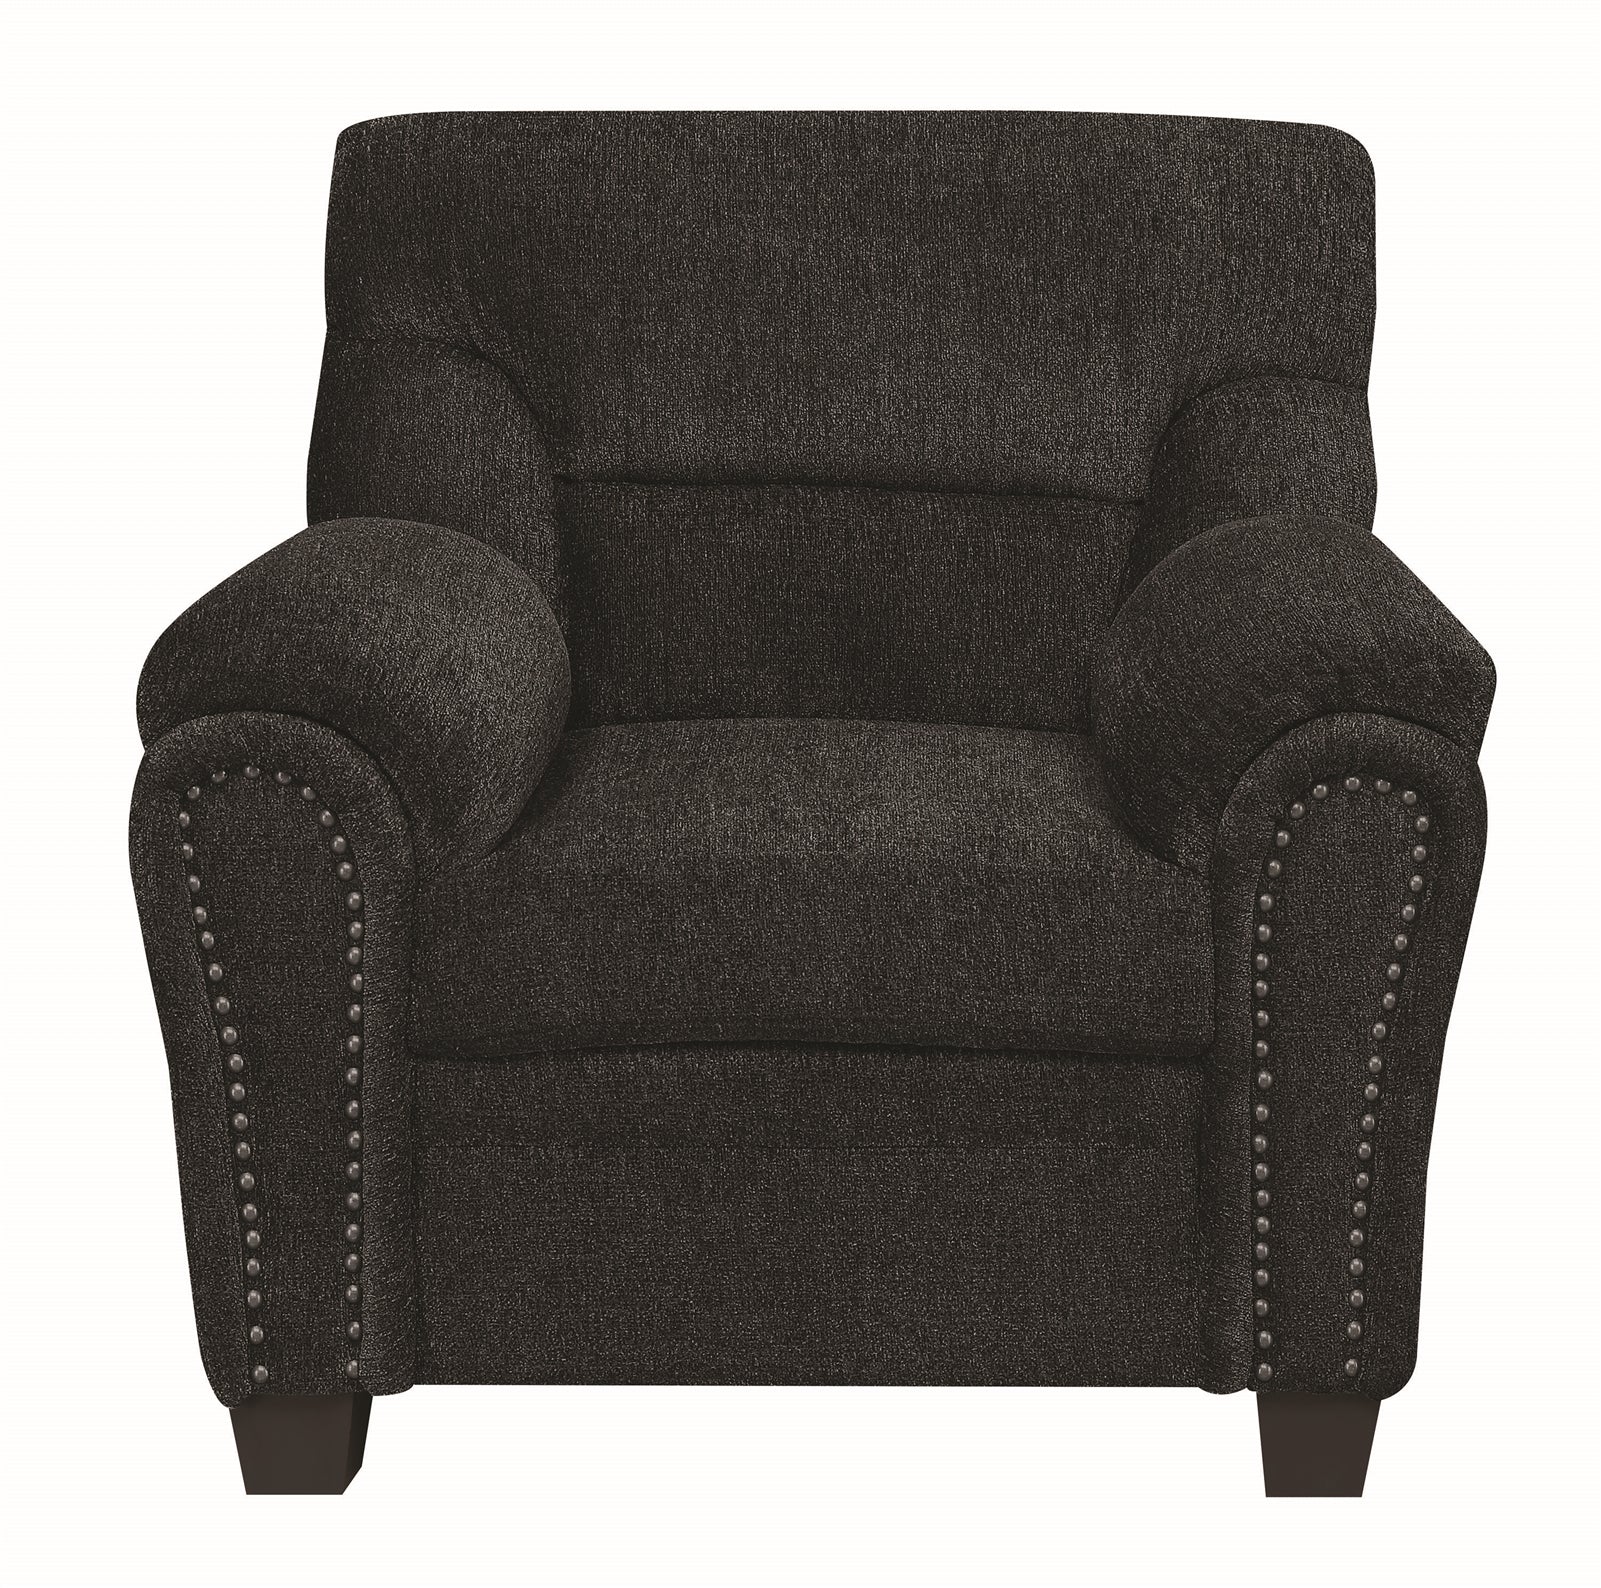 Clemintine Upholstered Chair With Nailhead Trim Graphite